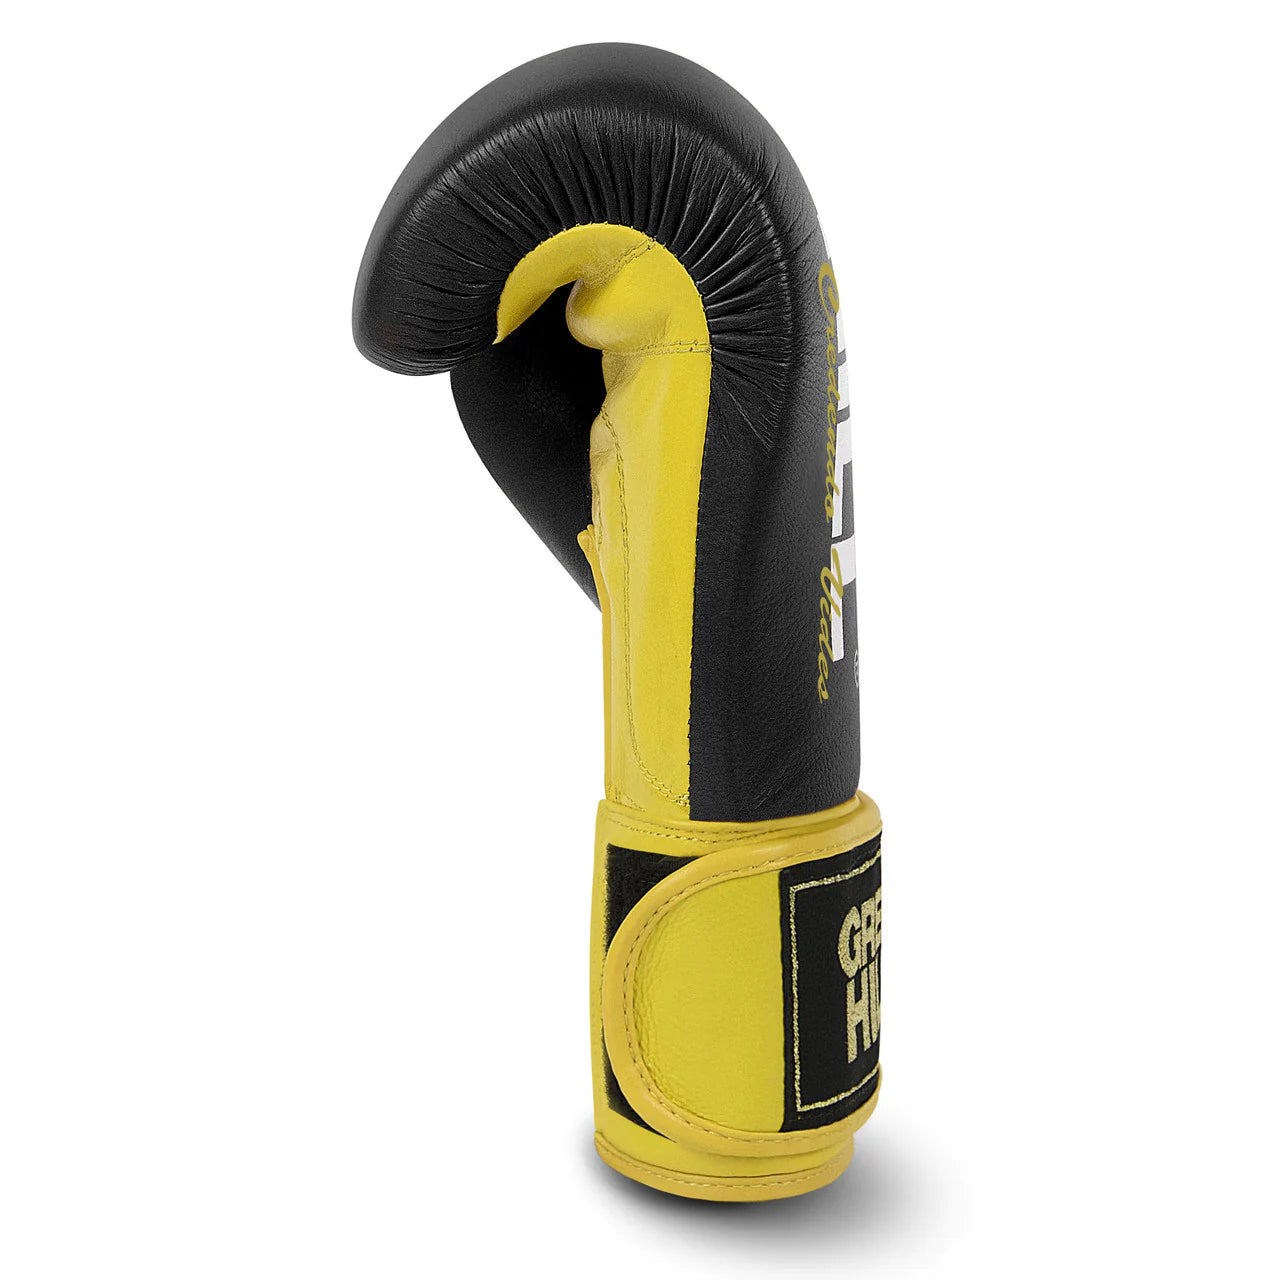 Boxing Gloves “ULTRA”